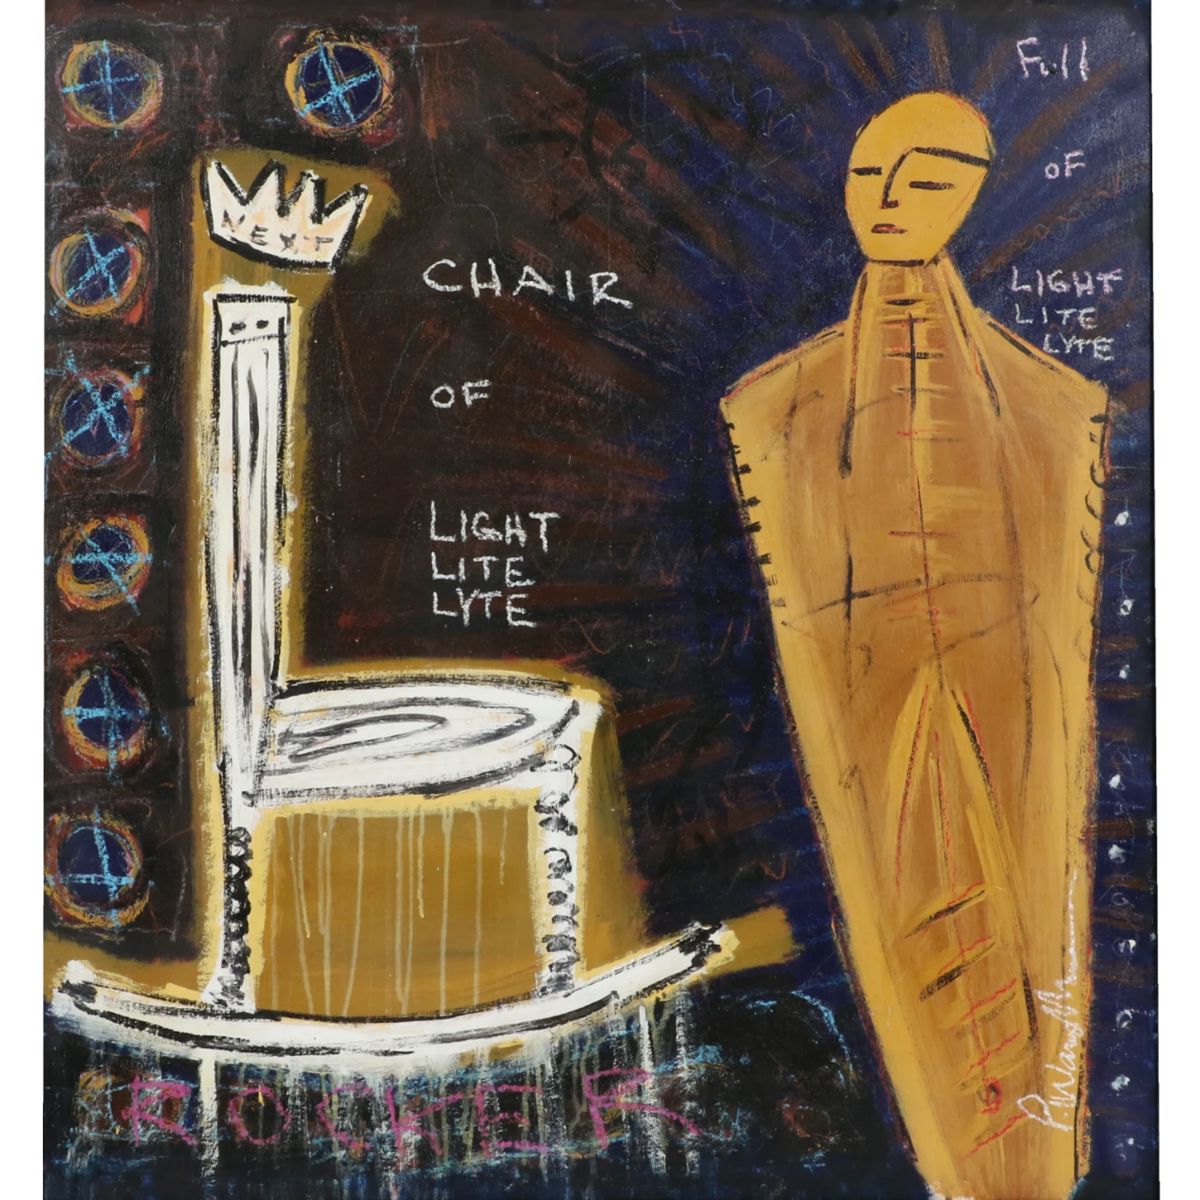 Paul Andrew Wandless, American (20th/21st Century), Chair of Lite, 2003, oil on canvas, 39 1/2"H x 36 1/2"W (sight), 43"H x 40"W (frame)
